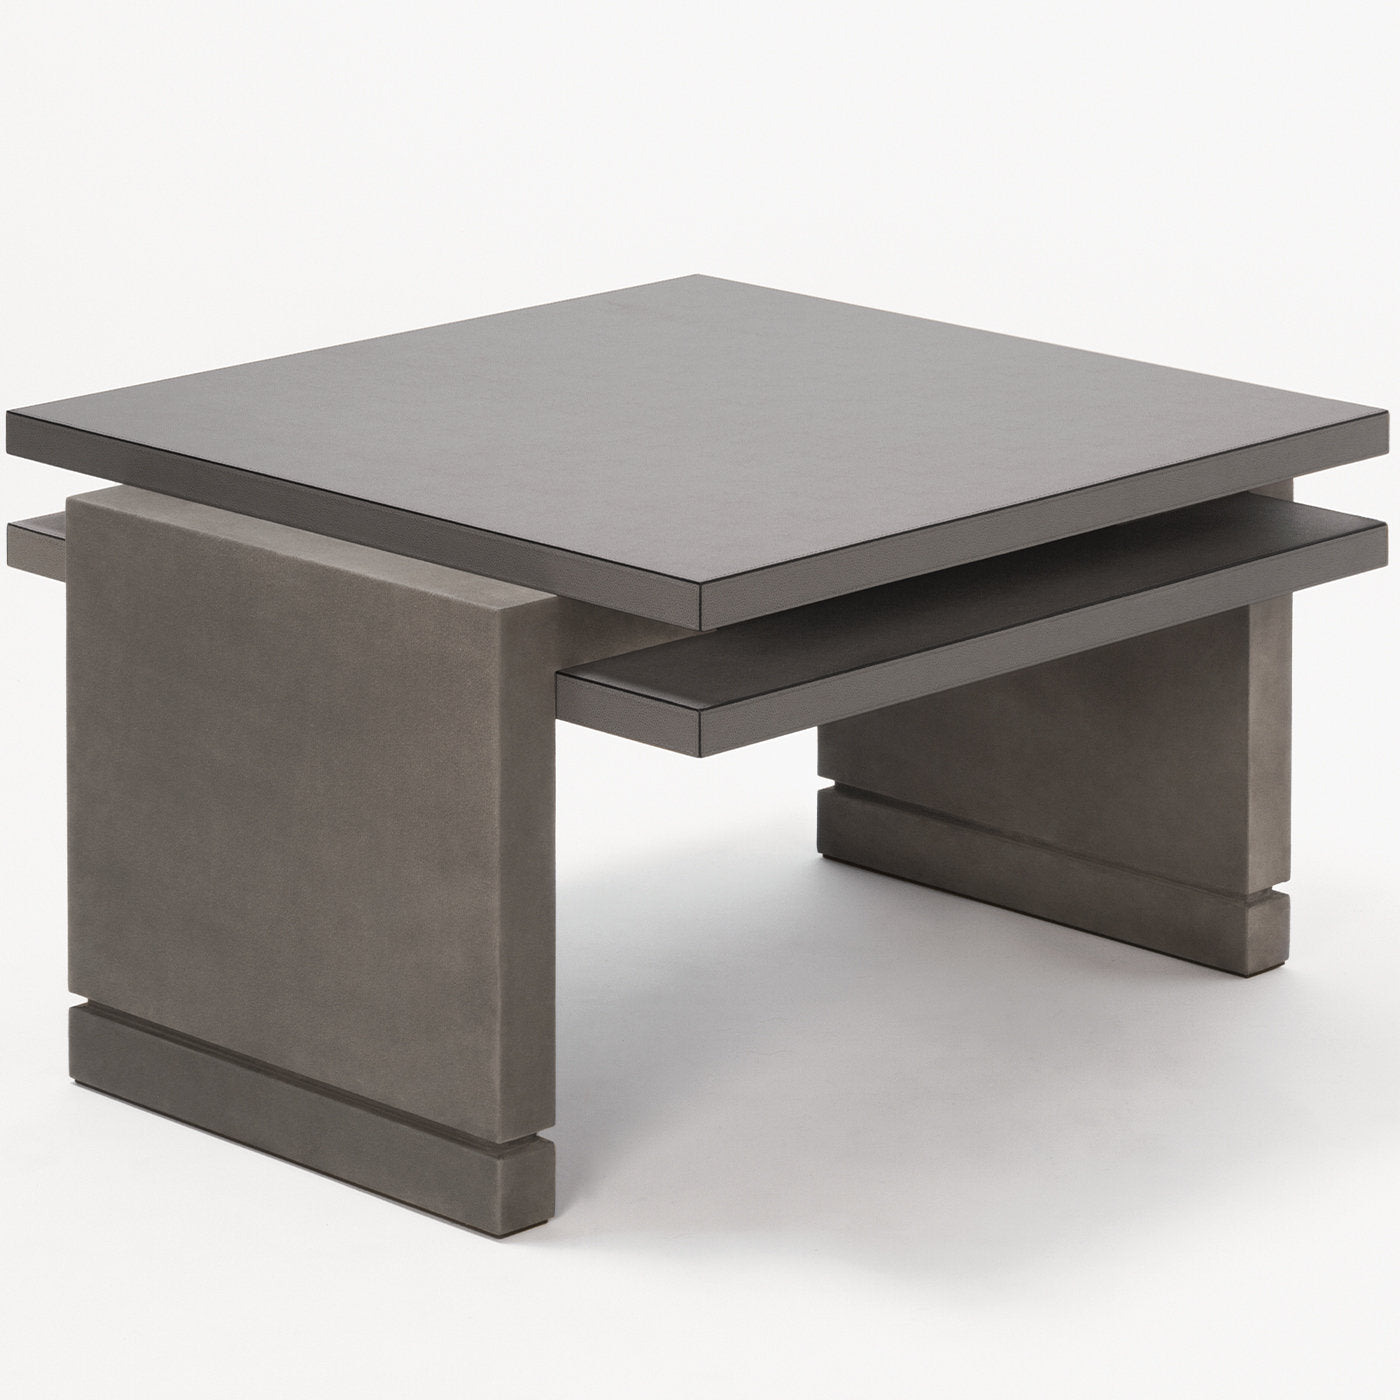 Stratos Leather Coffee Table  - Alternative view 1